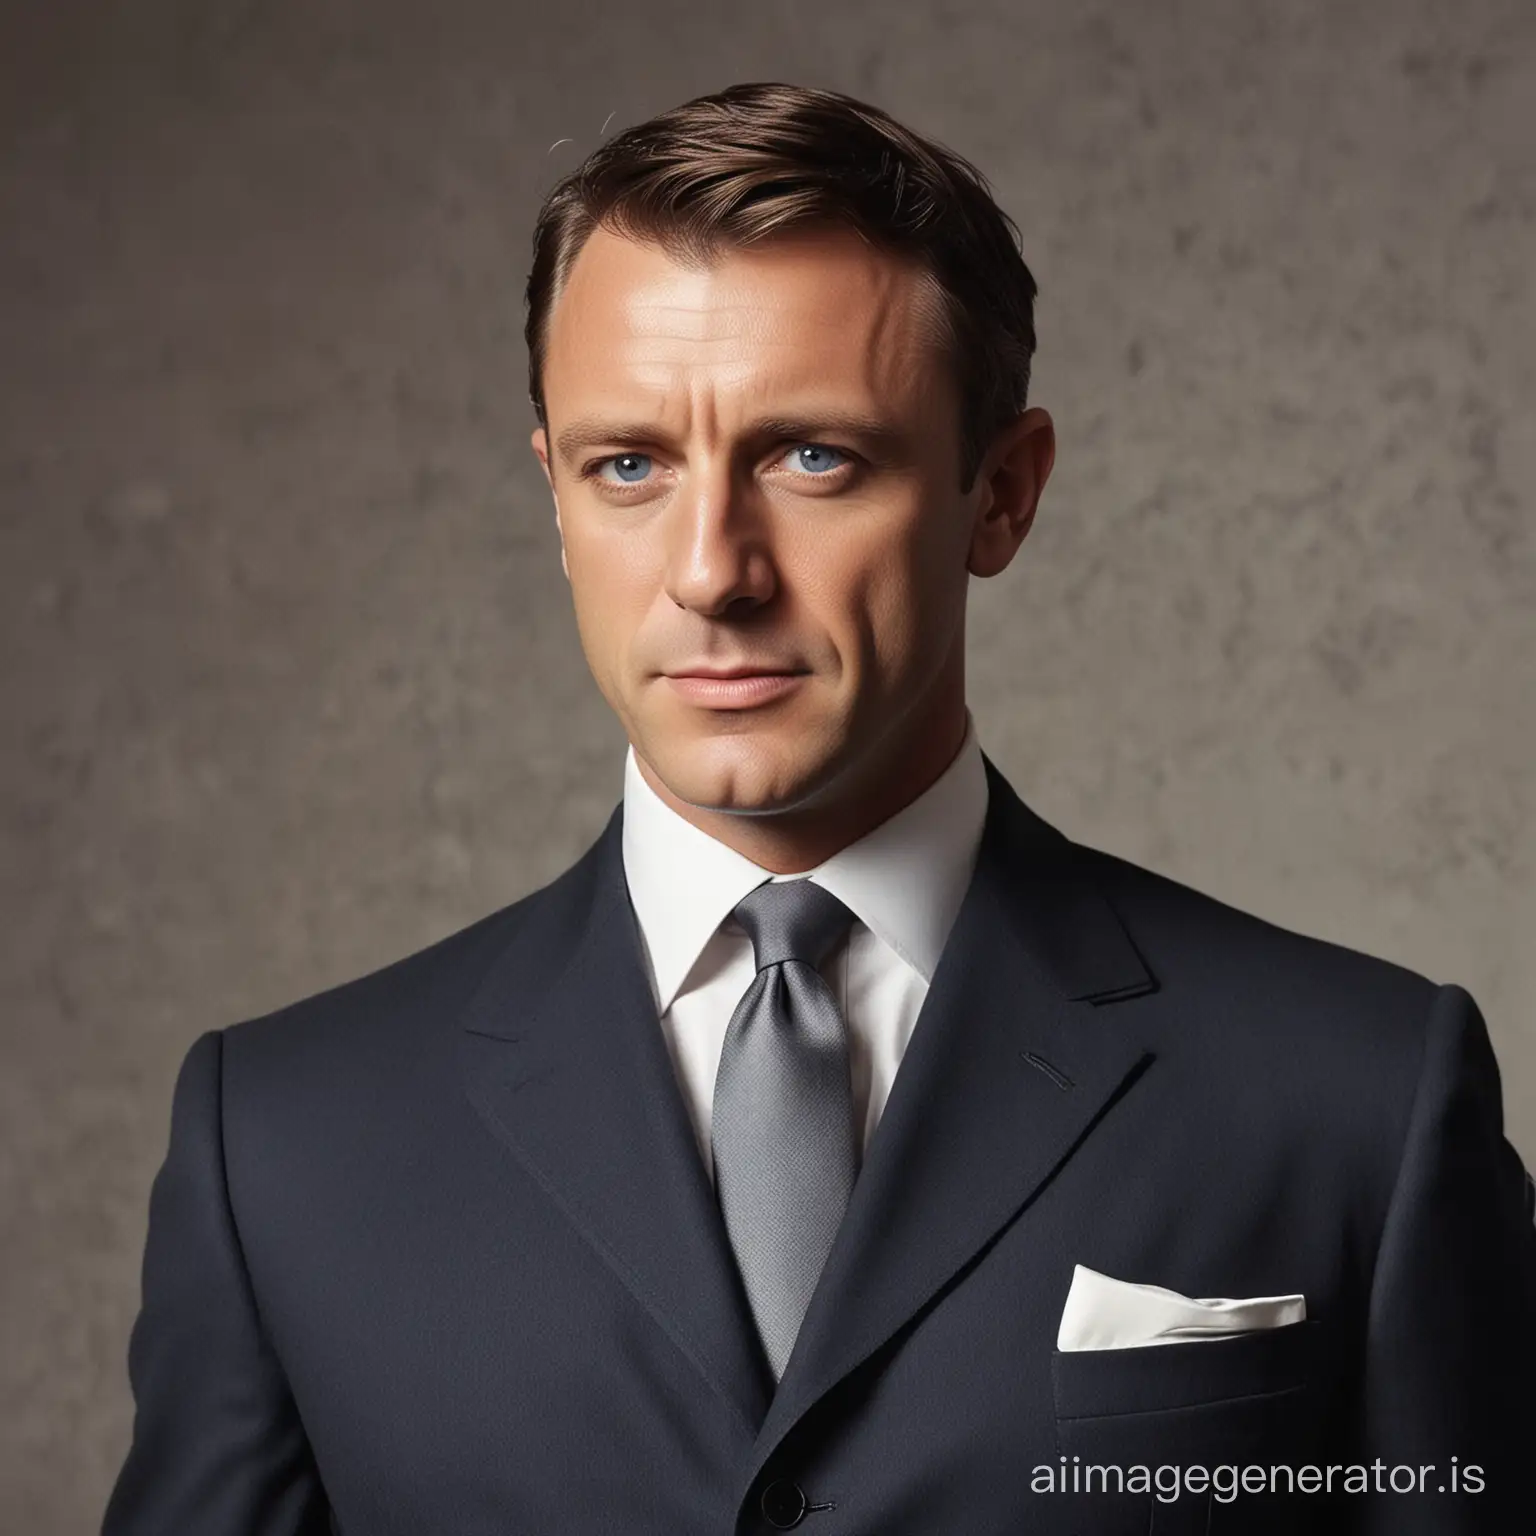 
In Ian Fleming's "Casino Royale," James Bond is depicted as the epitome of cool, sophisticated masculinity. Fleming describes Bond as a man in his mid-thirties, with a lean and athletic build honed through years of training and experience. Bond's hair is dark and neatly styled, complementing his chiseled features: a strong jawline, piercing blue-gray eyes that seem to miss nothing, and a confident, almost arrogant expression. He moves with a sense of purpose and self-assurance, exuding an aura of confidence and authority that commands respect from those around him.

Bond's attire is impeccably tailored, reflecting his status as a British secret agent: crisp suits in dark colors, accessorized with a perfectly knotted tie and polished leather shoes. He carries himself with a sense of effortless grace and poise, his movements calculated and precise. Yet, beneath his polished exterior lies a steely resolve and a willingness to do whatever it takes to accomplish his mission.

In "Casino Royale," Fleming presents Bond as a complex and multi-dimensional character, capable of both ruthless efficiency and moments of unexpected tenderness. He is a man of contradictions: at once charming and aloof, ruthless and compassionate, making him a compelling and enduring figure in the world of literature.